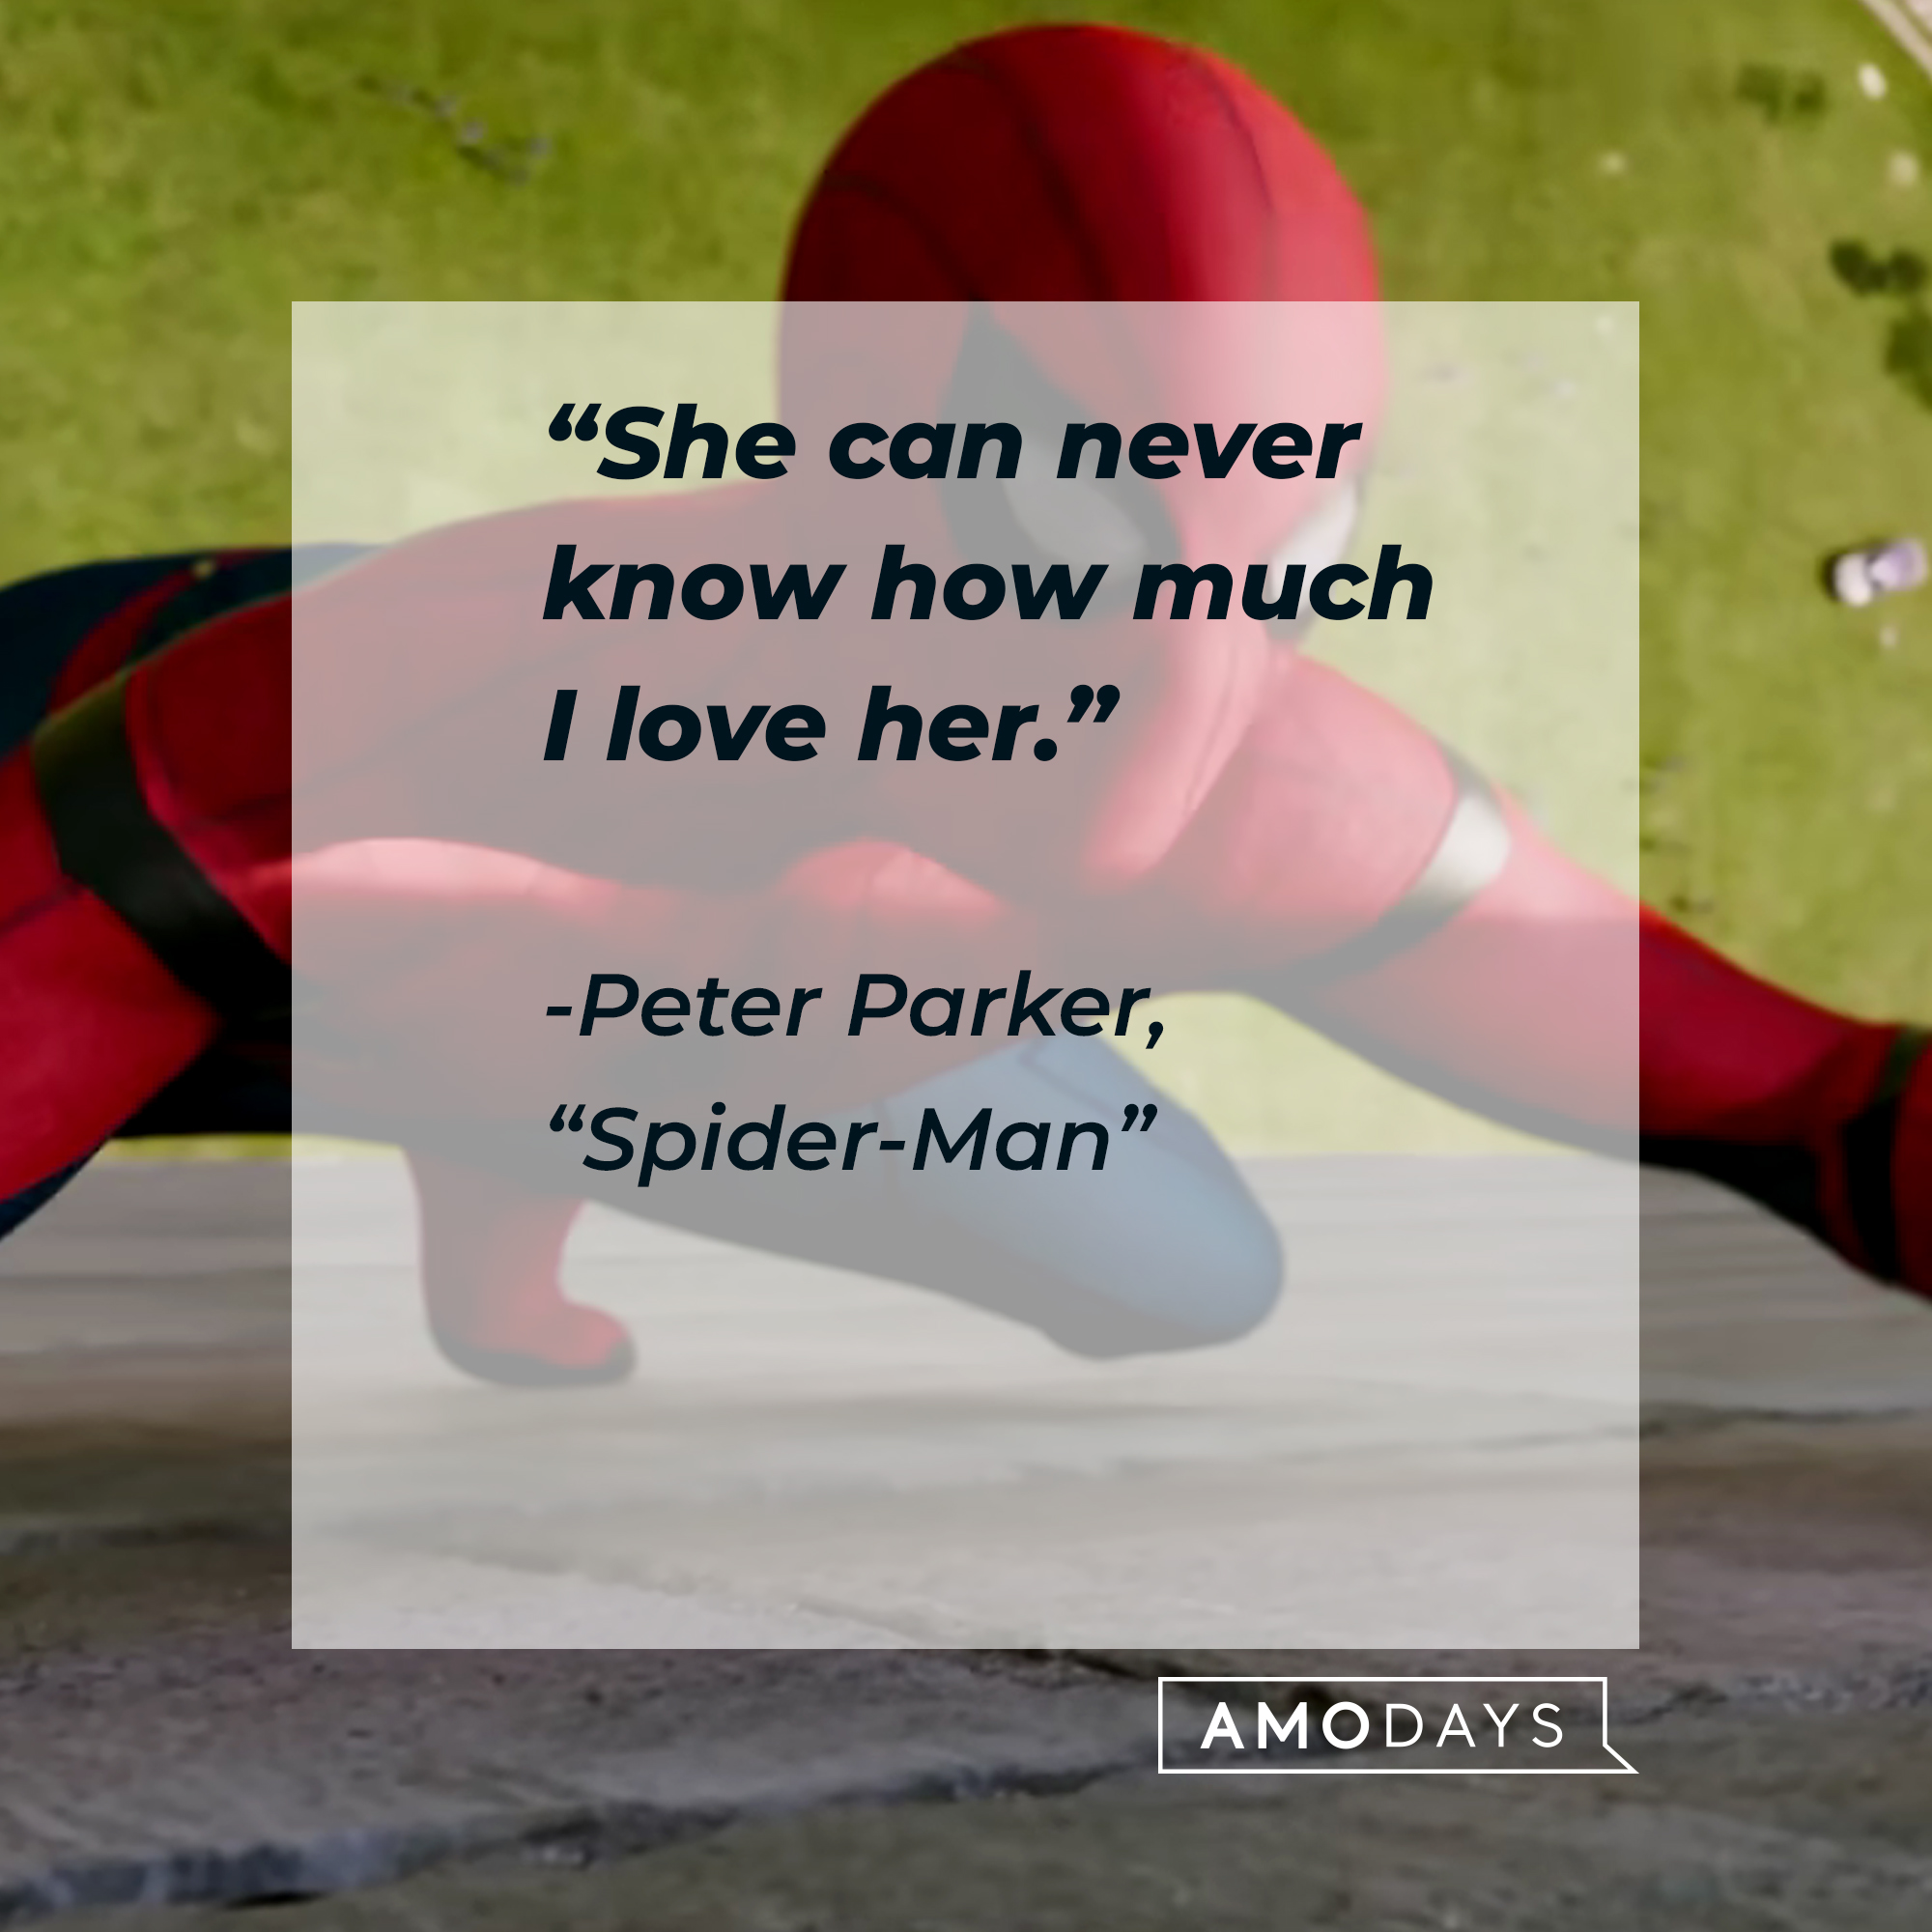 Spider-Man's quote from "Spider-Man:" “She can never know how much I love her.”  | Source: Facebook.com/SpiderManMovie